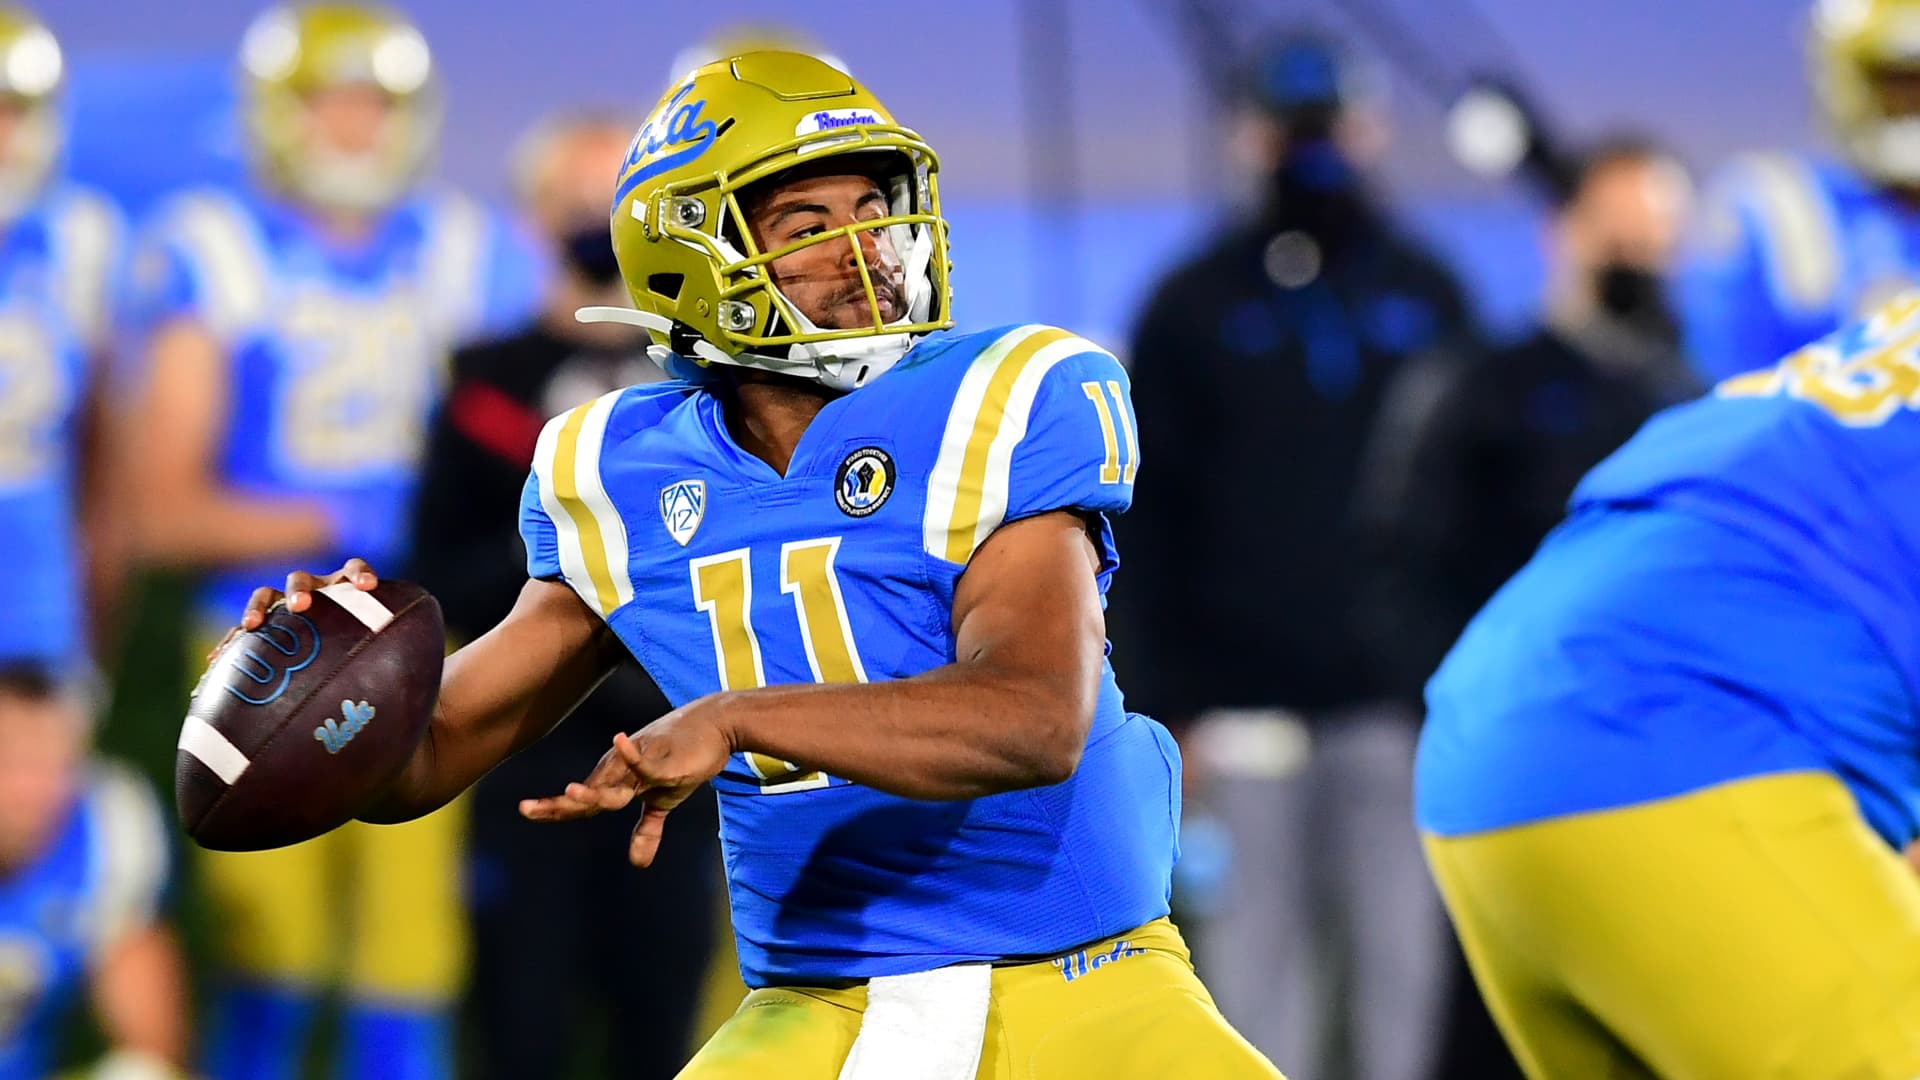 Quarterback Chase Griffin #11 of the UCLA Bruins looks to pass the ball in the game against the Arizona Wildcats at the Rose Bowl on November 28, 2020 in Pasadena, California. 